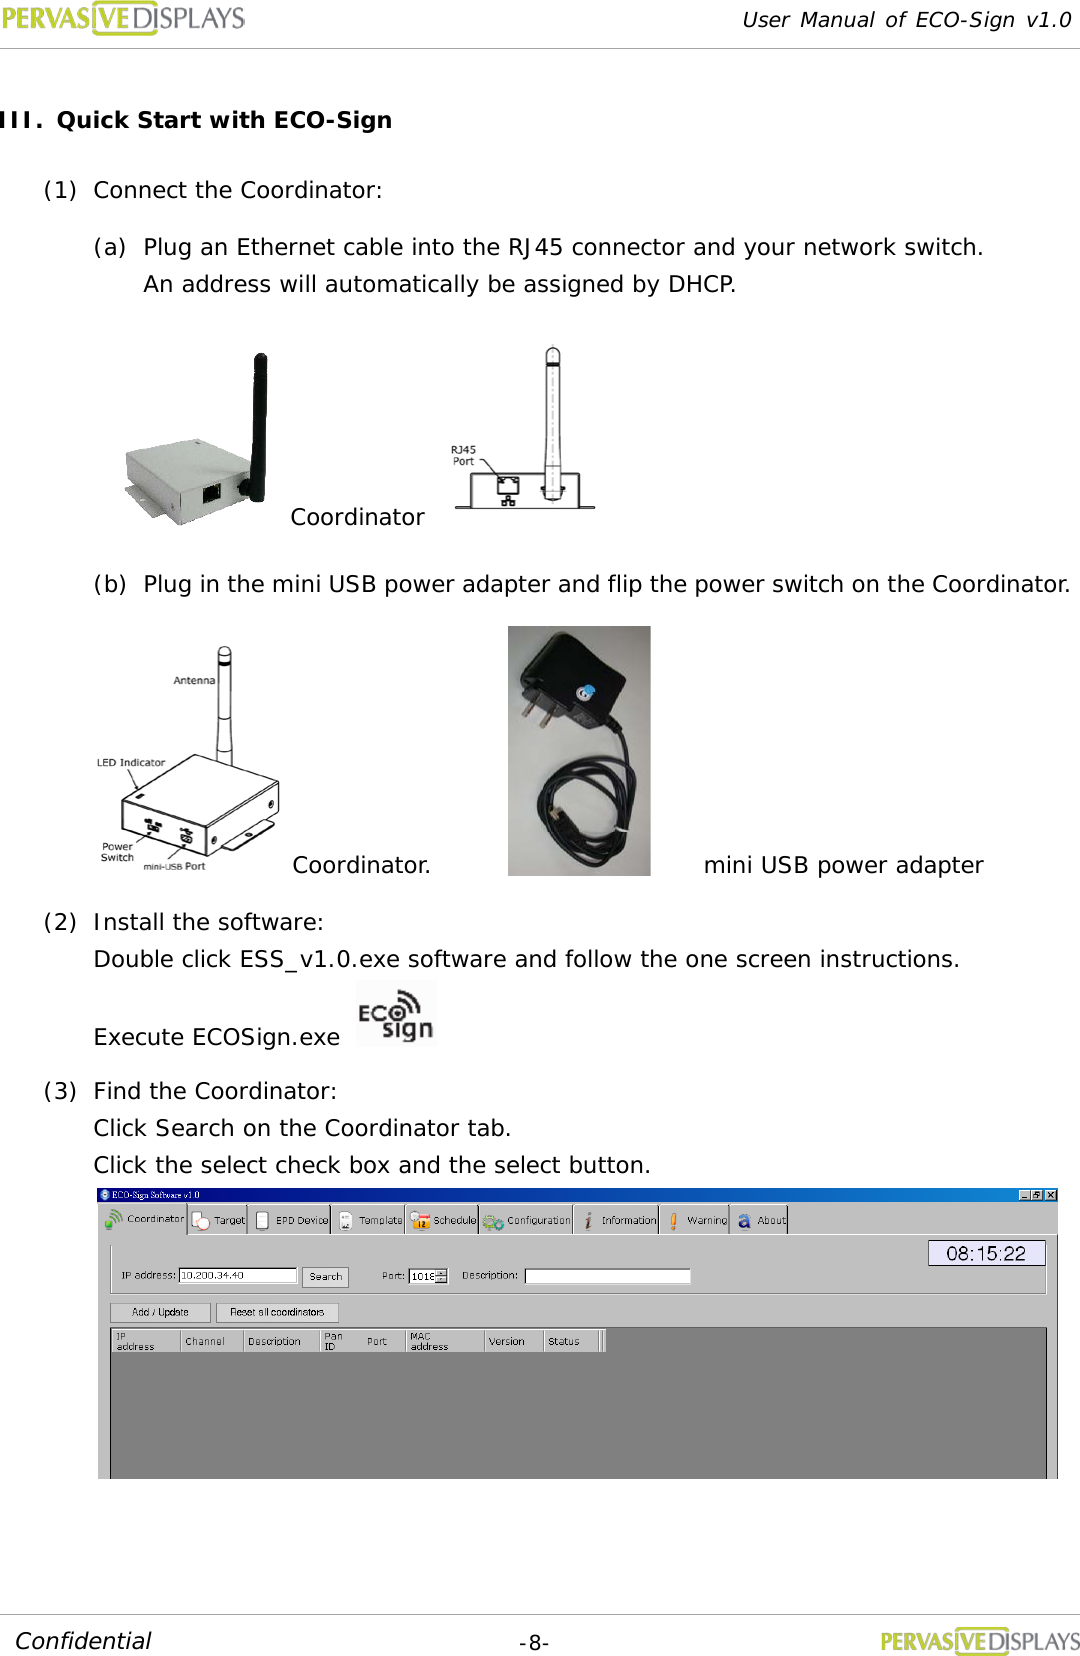 User Manual of ECO-Sign v1.0  -8- Confidential III. Quick Start with ECO-Sign (1) Connect the Coordinator:  (a) Plug an Ethernet cable into the RJ45 connector and your network switch. An address will automatically be assigned by DHCP.       Coordinator  (b) Plug in the mini USB power adapter and flip the power switch on the Coordinator. Coordinator.   mini USB power adapter (2) Install the software:  Double click ESS_v1.0.exe software and follow the one screen instructions. Execute ECOSign.exe   (3) Find the Coordinator:  Click Search on the Coordinator tab.  Click the select check box and the select button.  